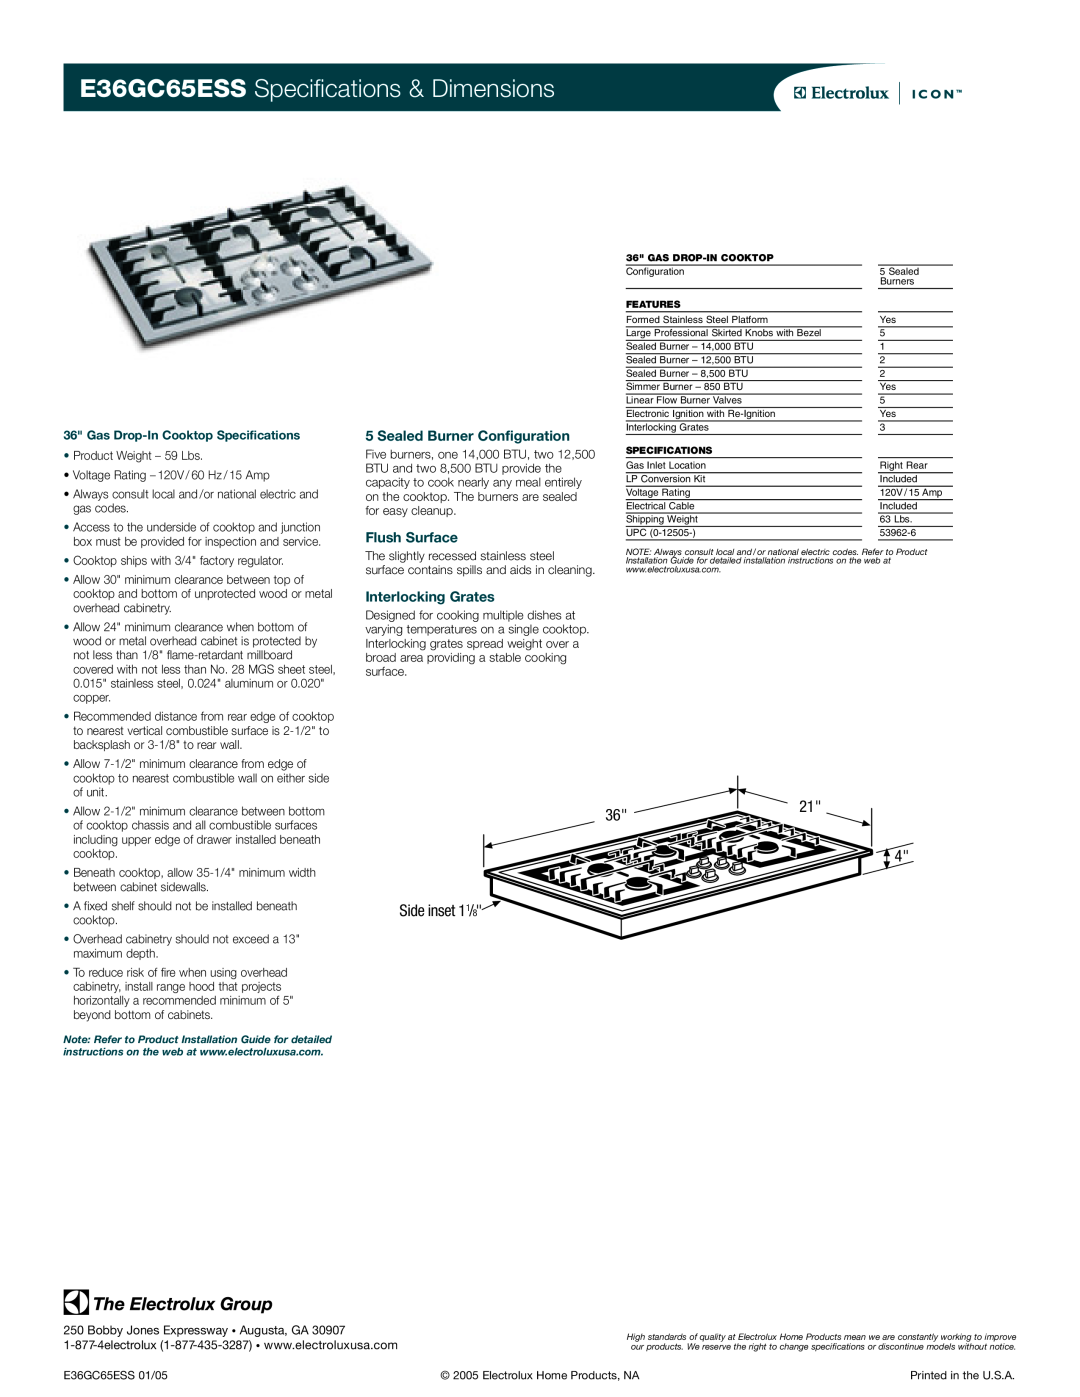 Electrolux specifications E36GC65ESS Specifications & Dimensions, Side inset 11/8, Sealed Burner Configuration 